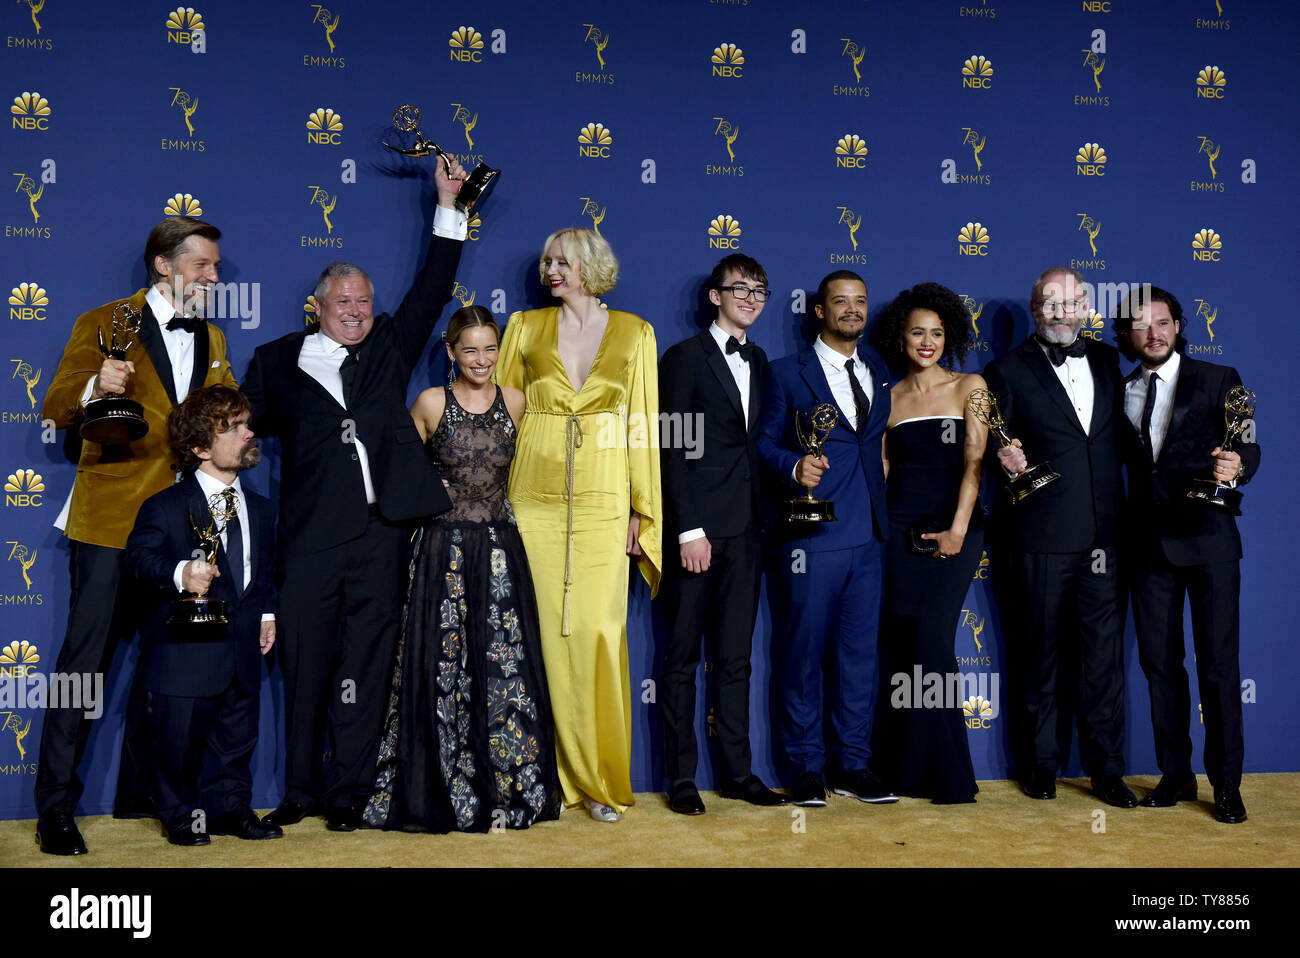 Cast And Crew Of Game Of Thrones Winners Of The Award For